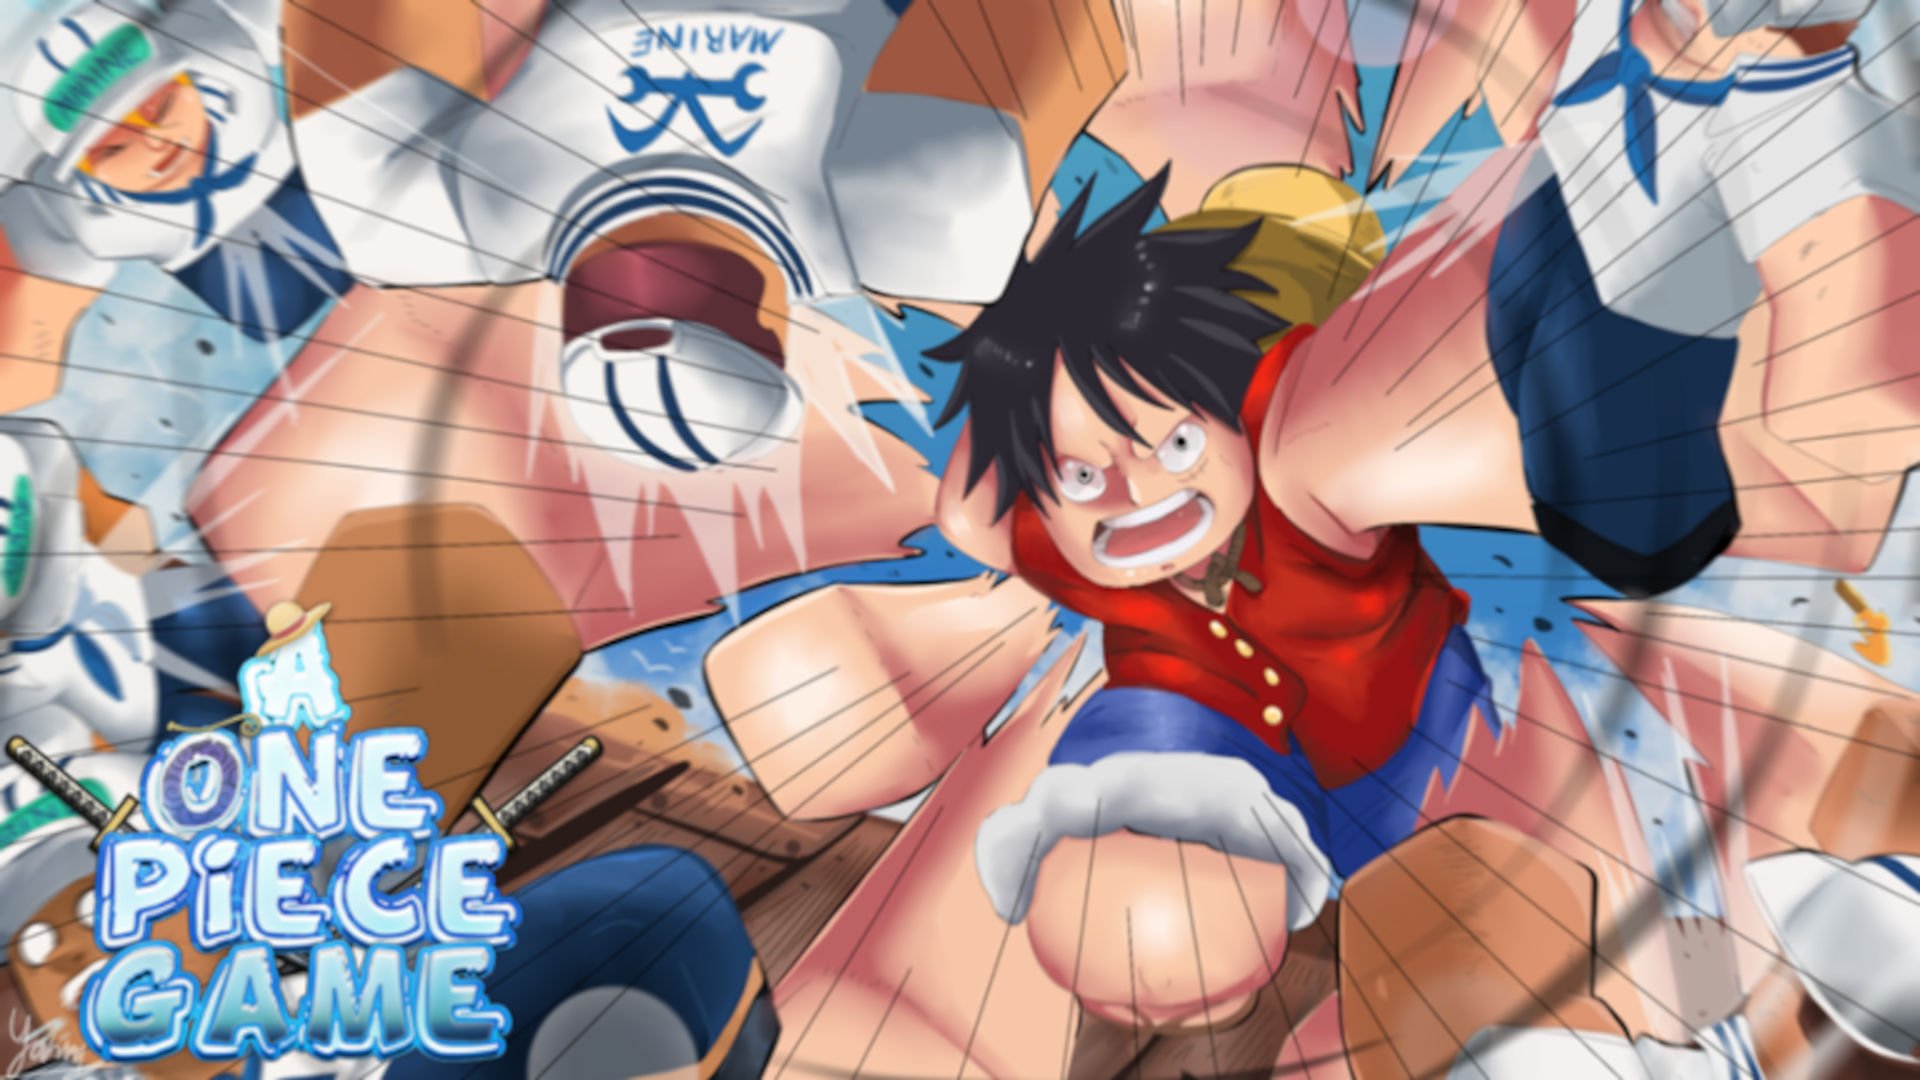 A One Piece Game character punching sailors.